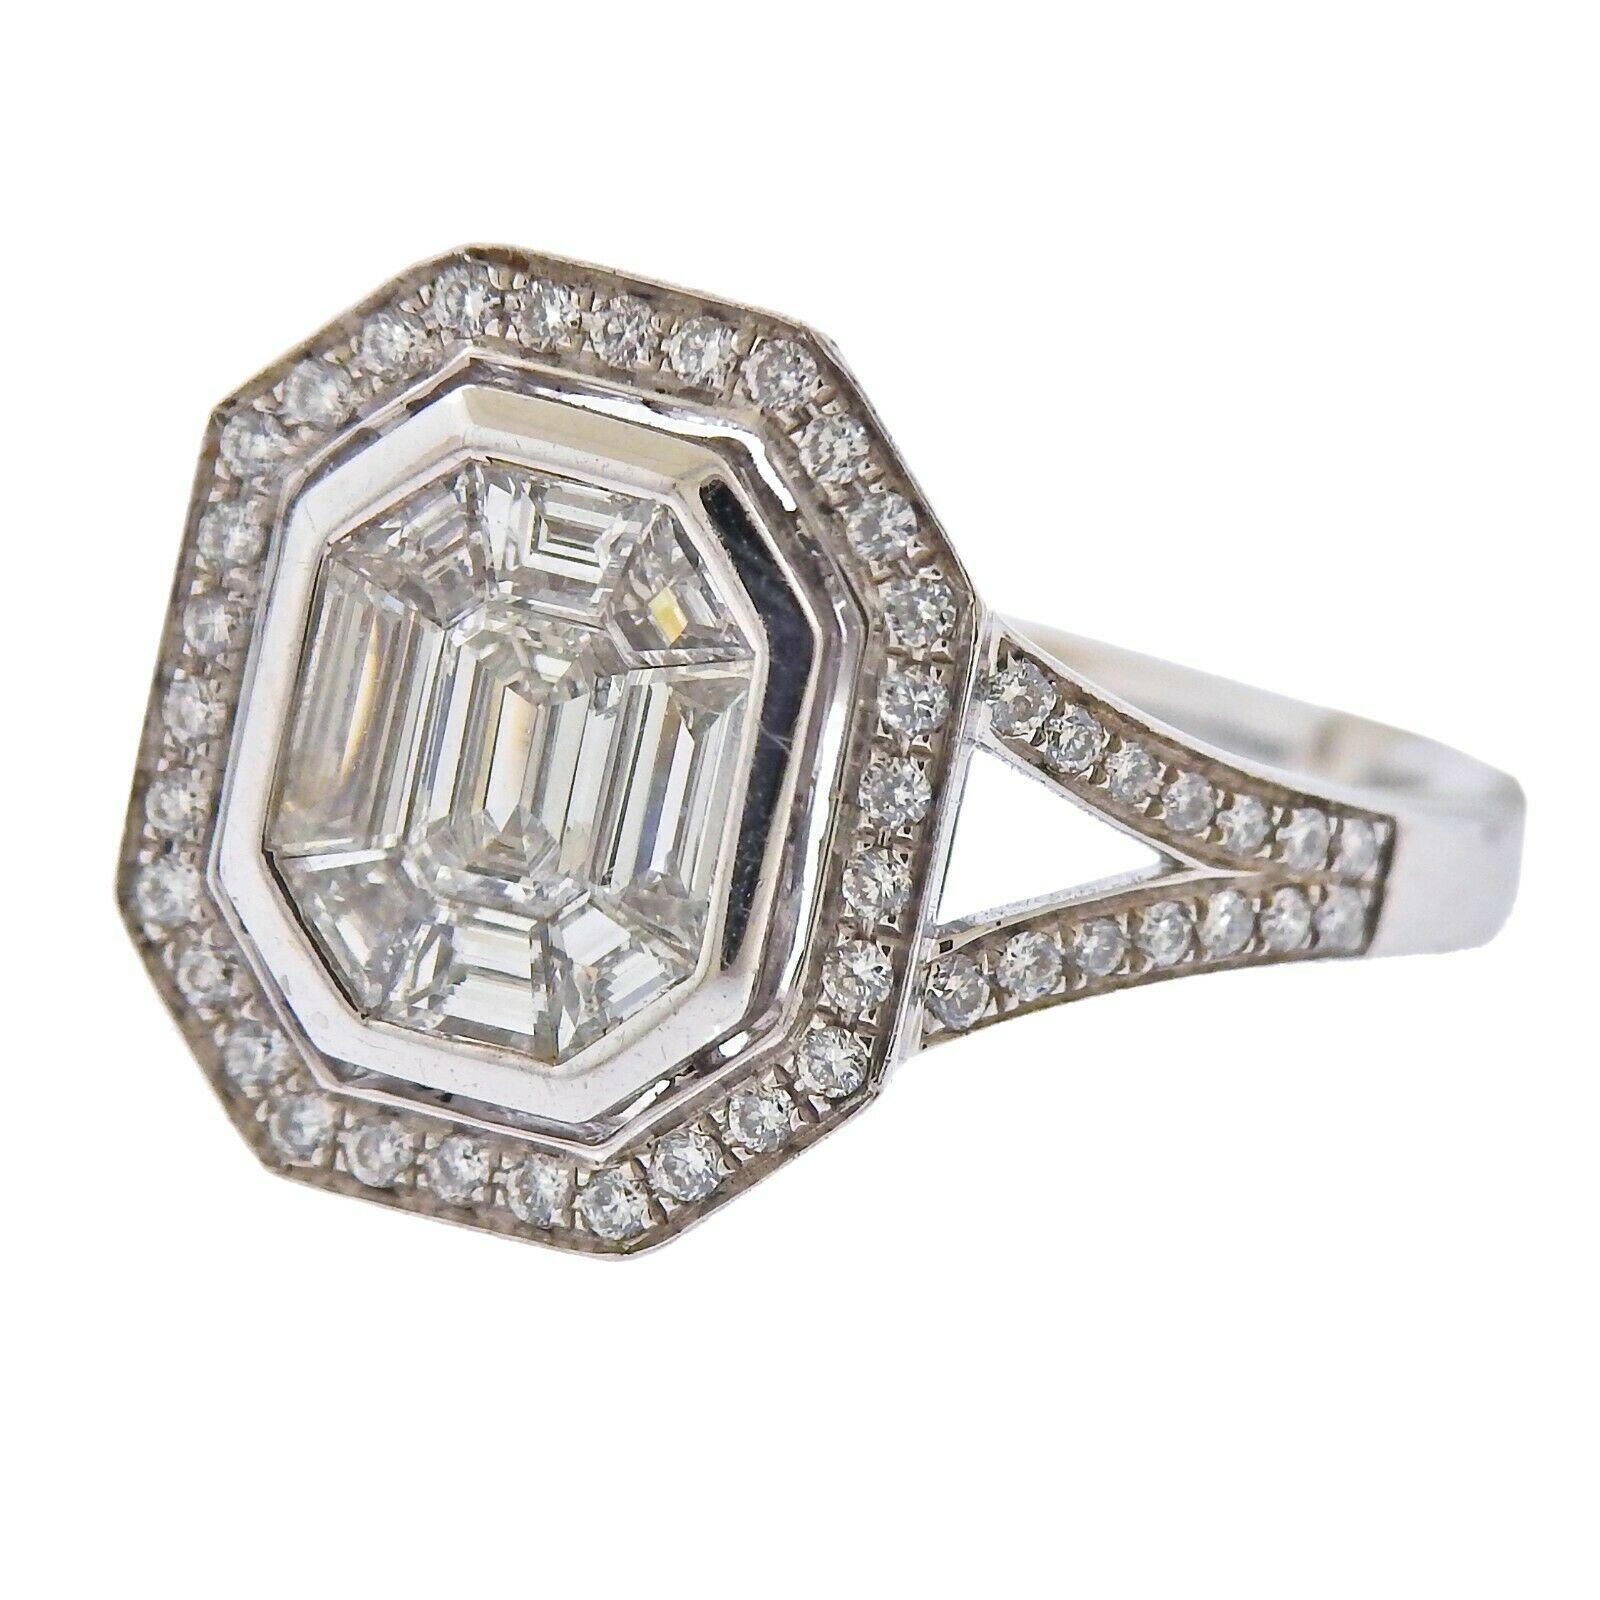 18k white gold ring by Gregg Ruth. Set with 1.20ctw in VS2/GH diamonds. Ring size - 6.65, ring top - 15mm x 13mm. Marked - 750, GR, 0.91ct. Weight - 5.2 grams. Retail $14930, brand new store sample. 
